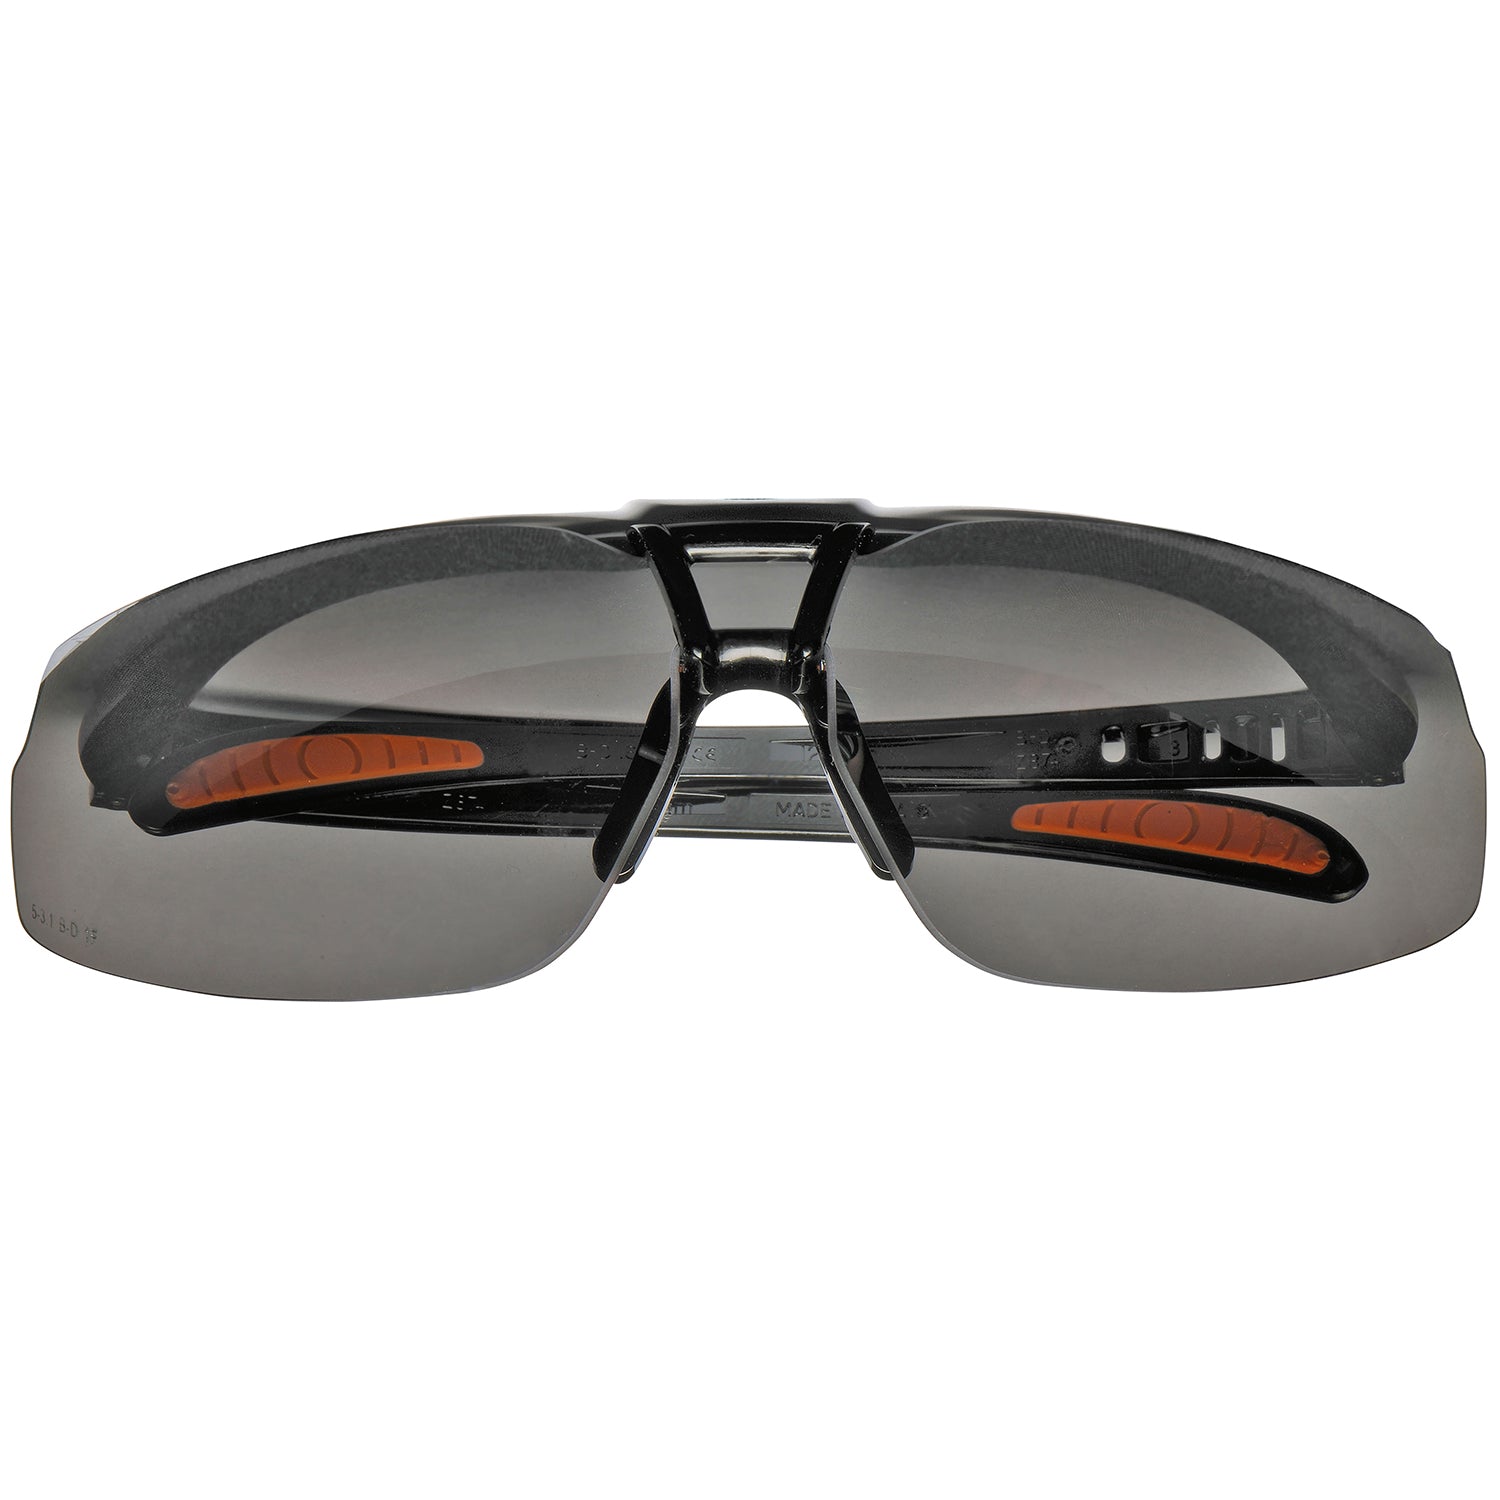  Protege Extreme SCT Grey Lens  Honeywell Safety Glasses,